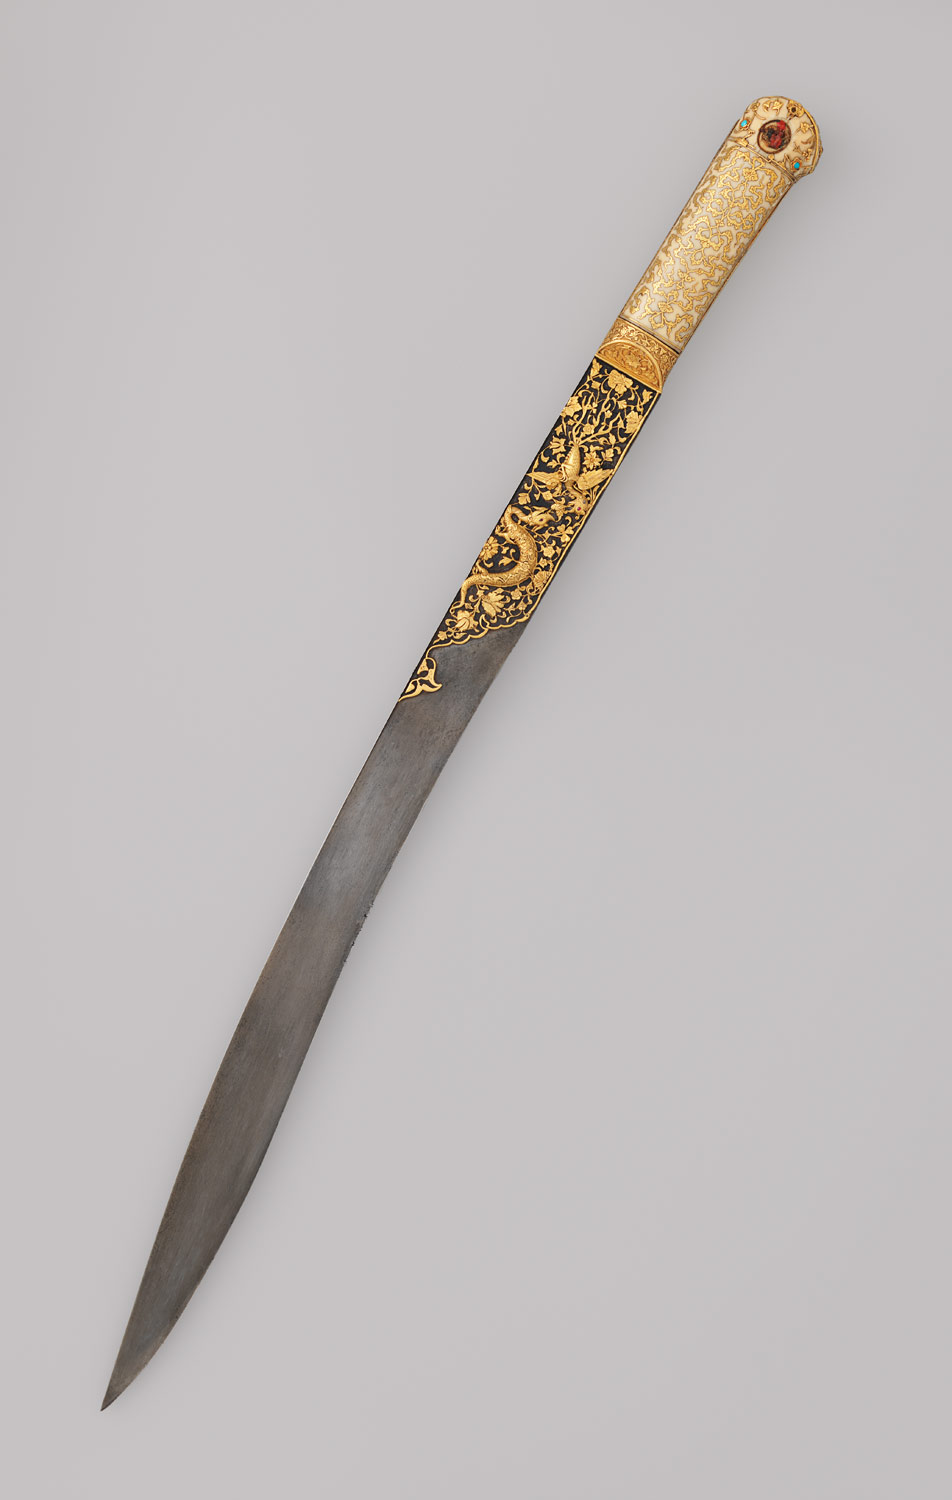 Yataghan from the Court of Süleyman the Magnificent (reigned 1520–66)